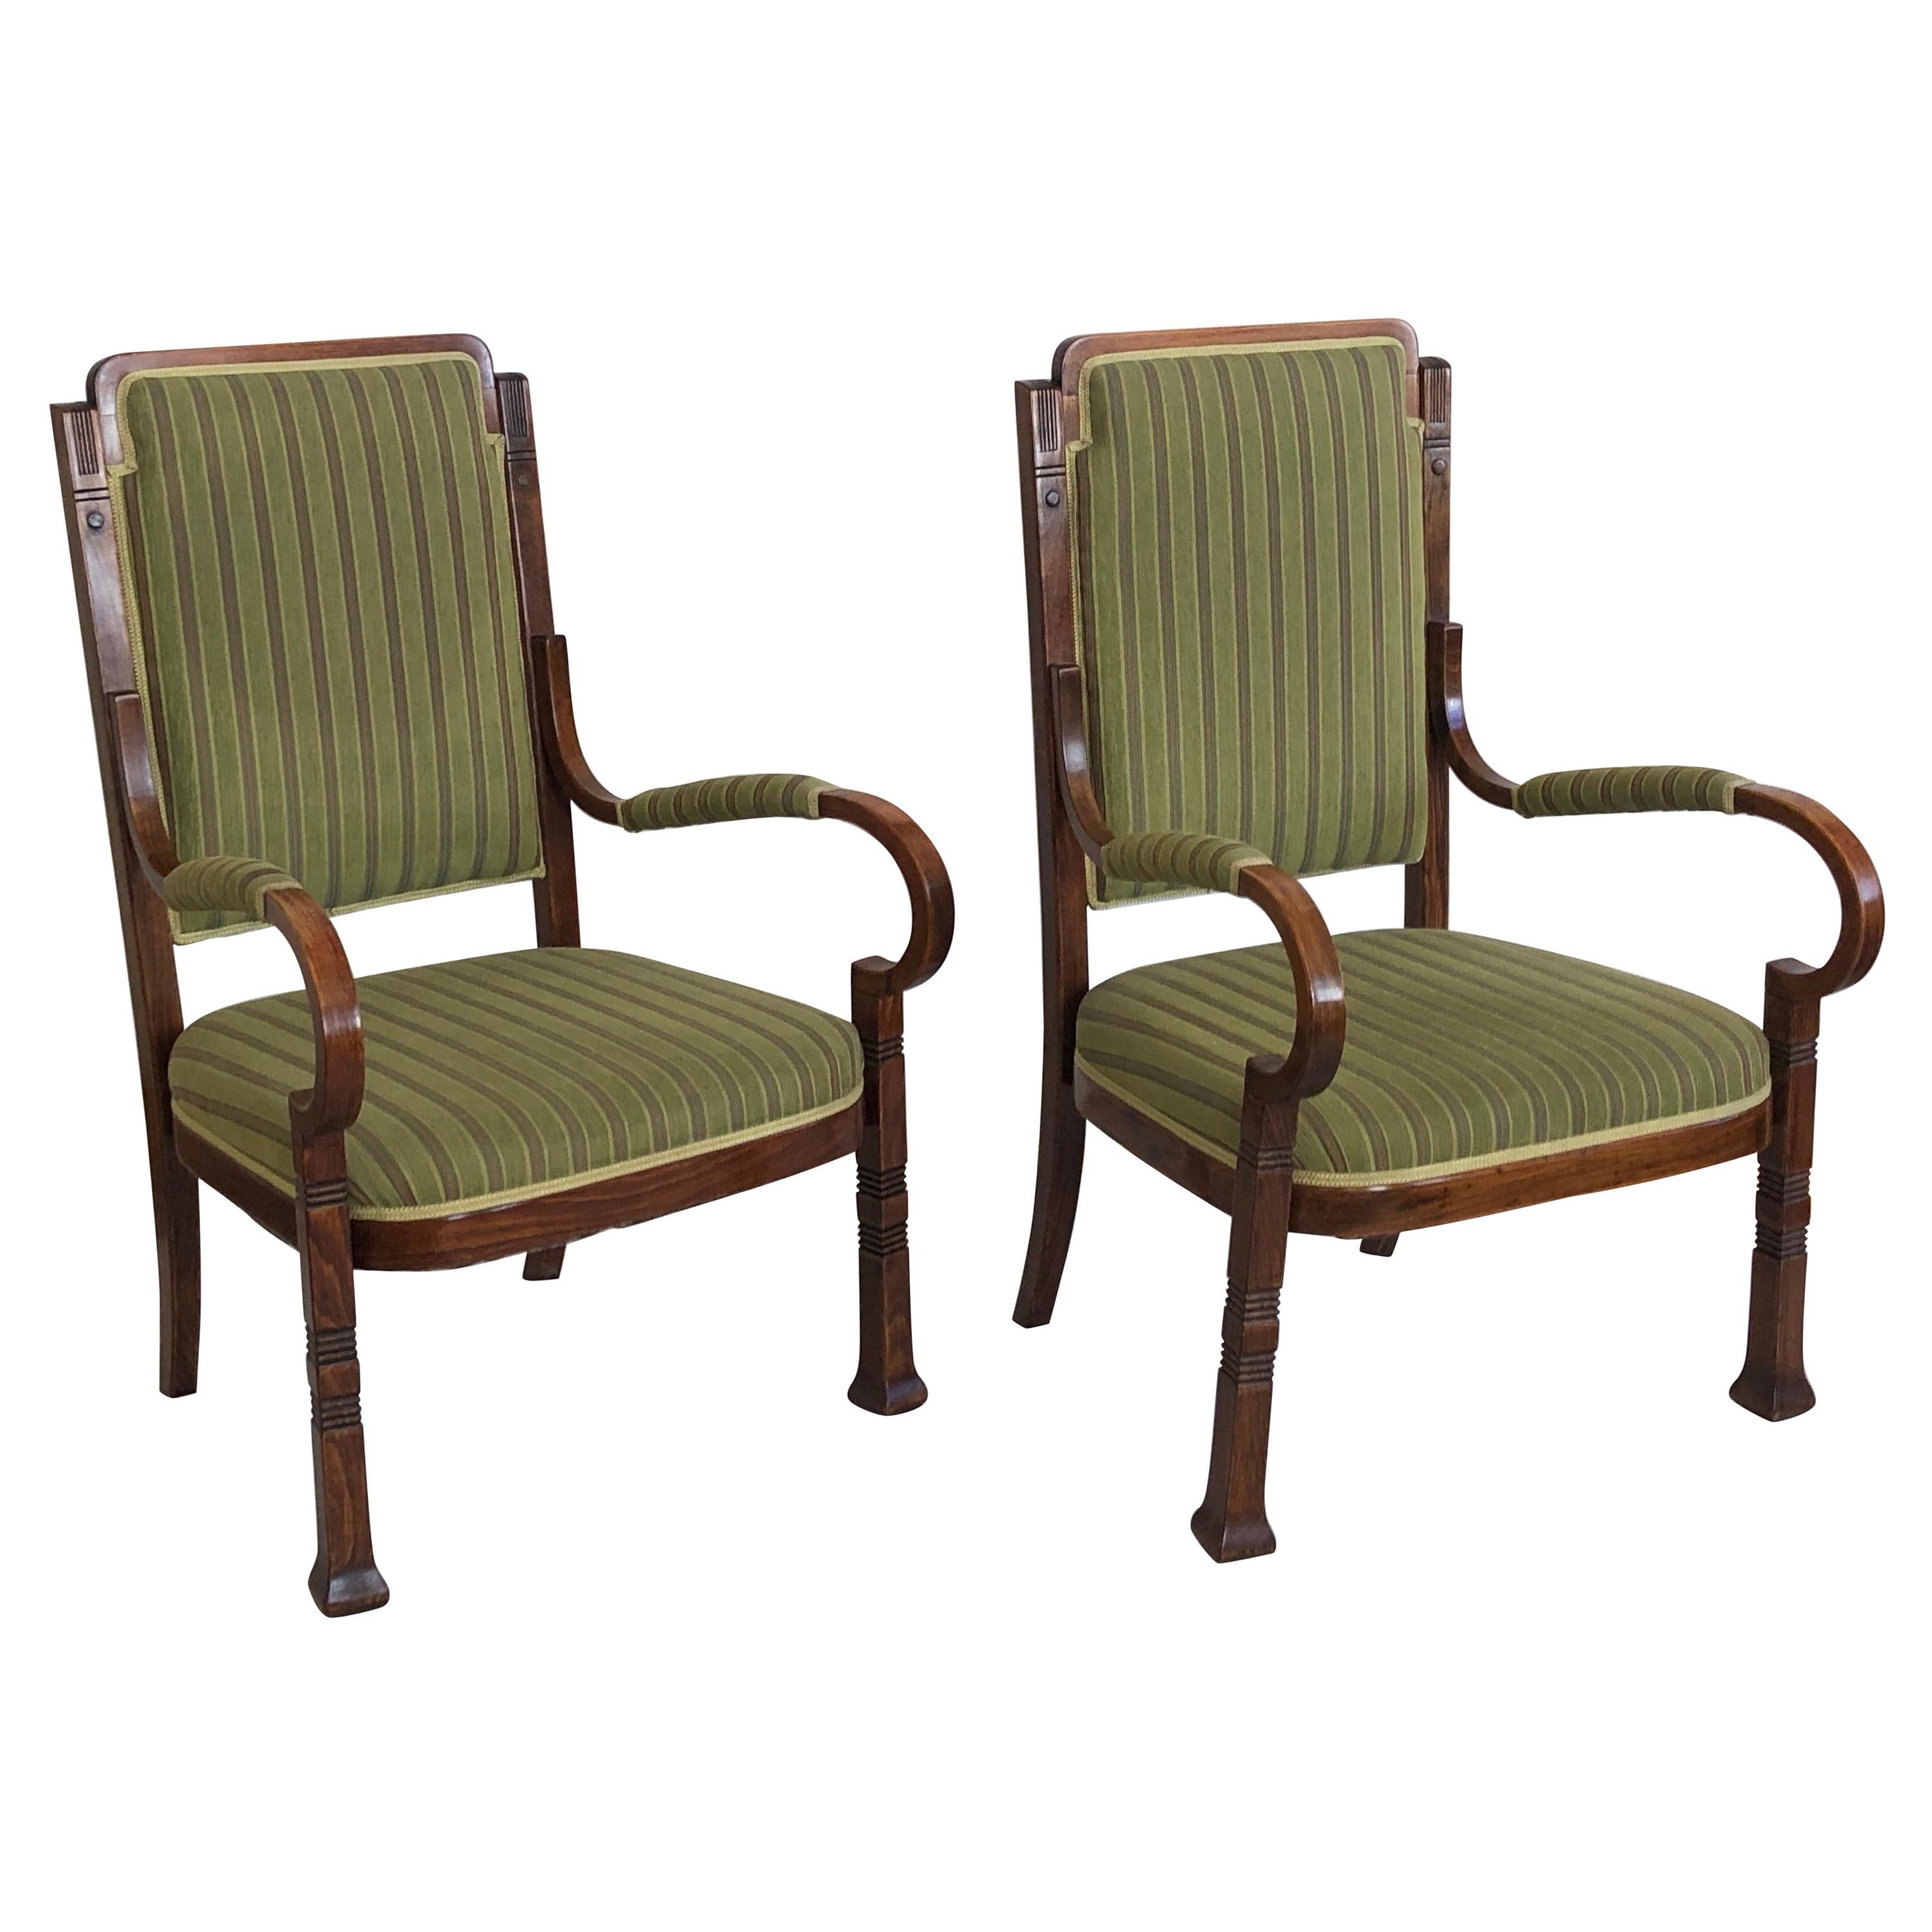 Rare Salon Armchairs Nr. 14 by Thonet, Set of Two